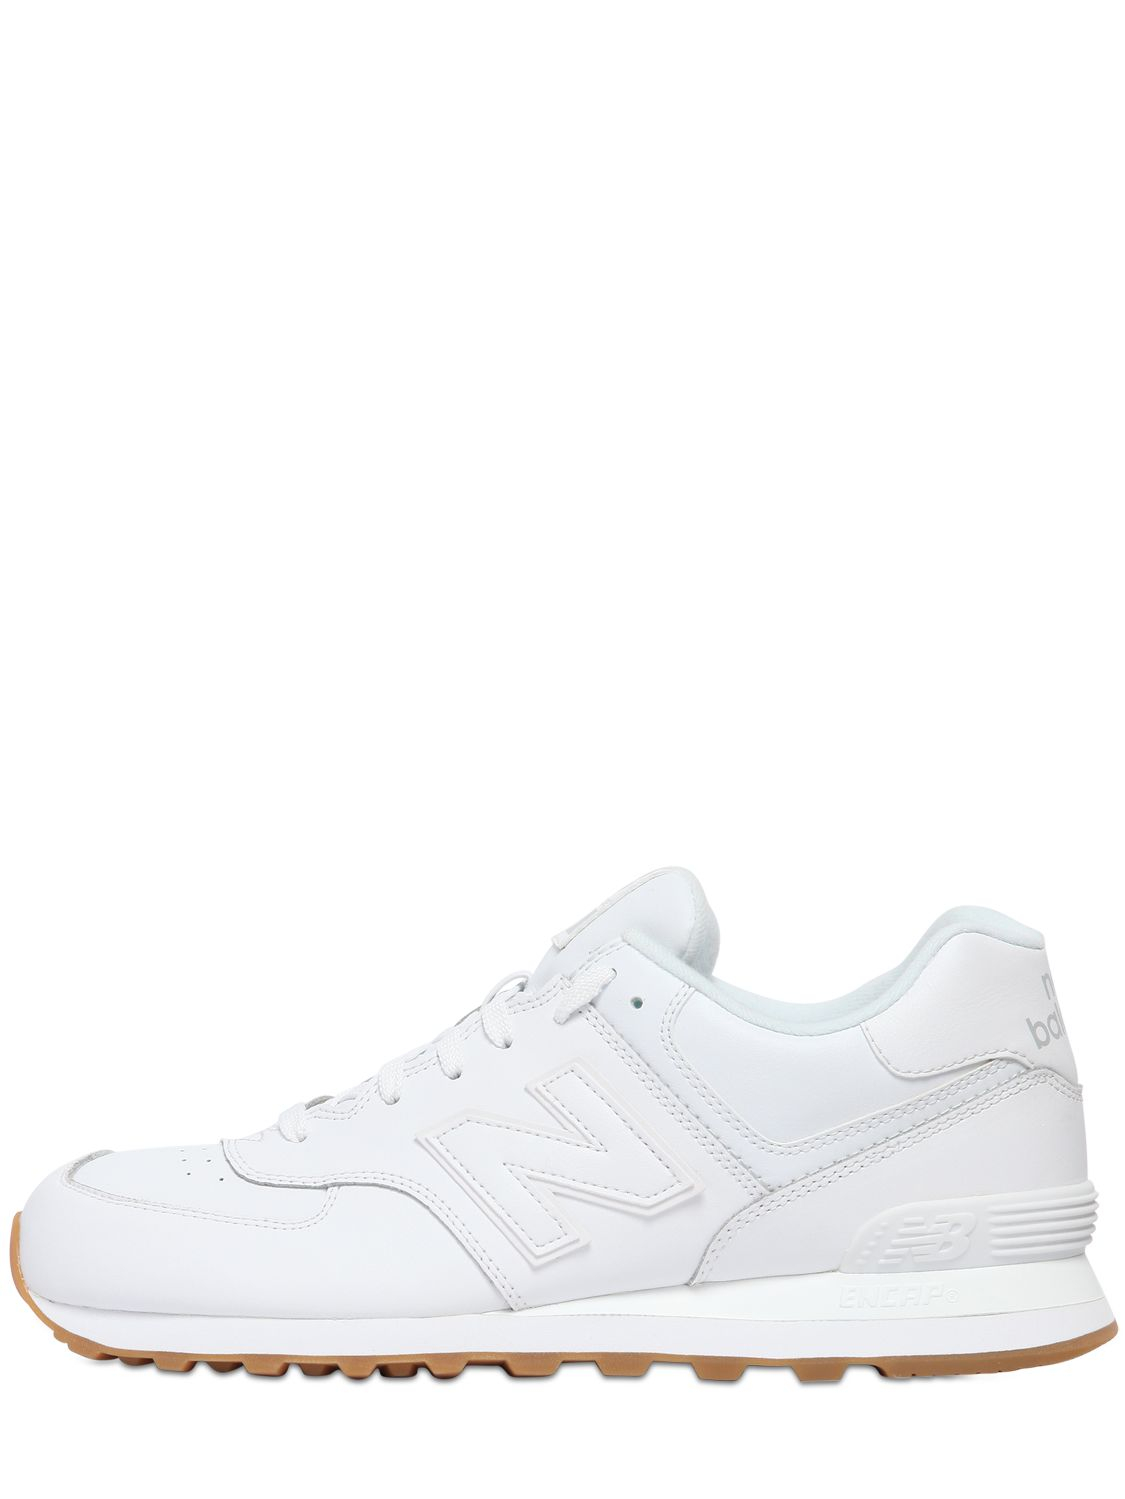 New Balance 574 Leather Sneakers in White - Lyst